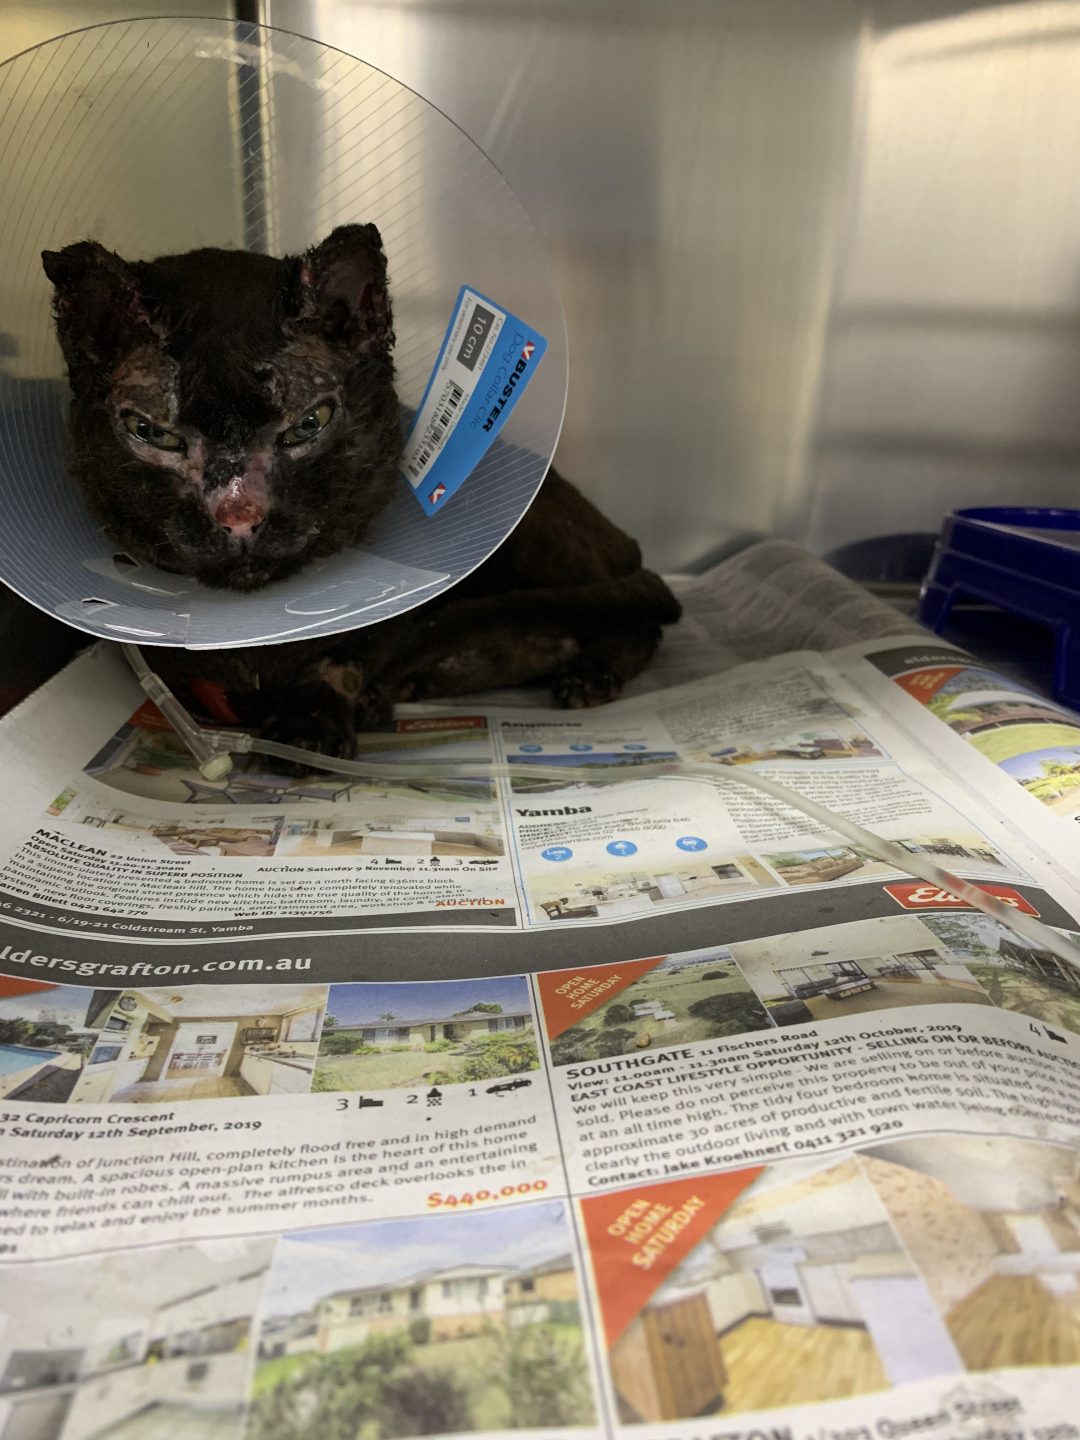 Cat with burnt face wearing an elizabethan collar on newspaper